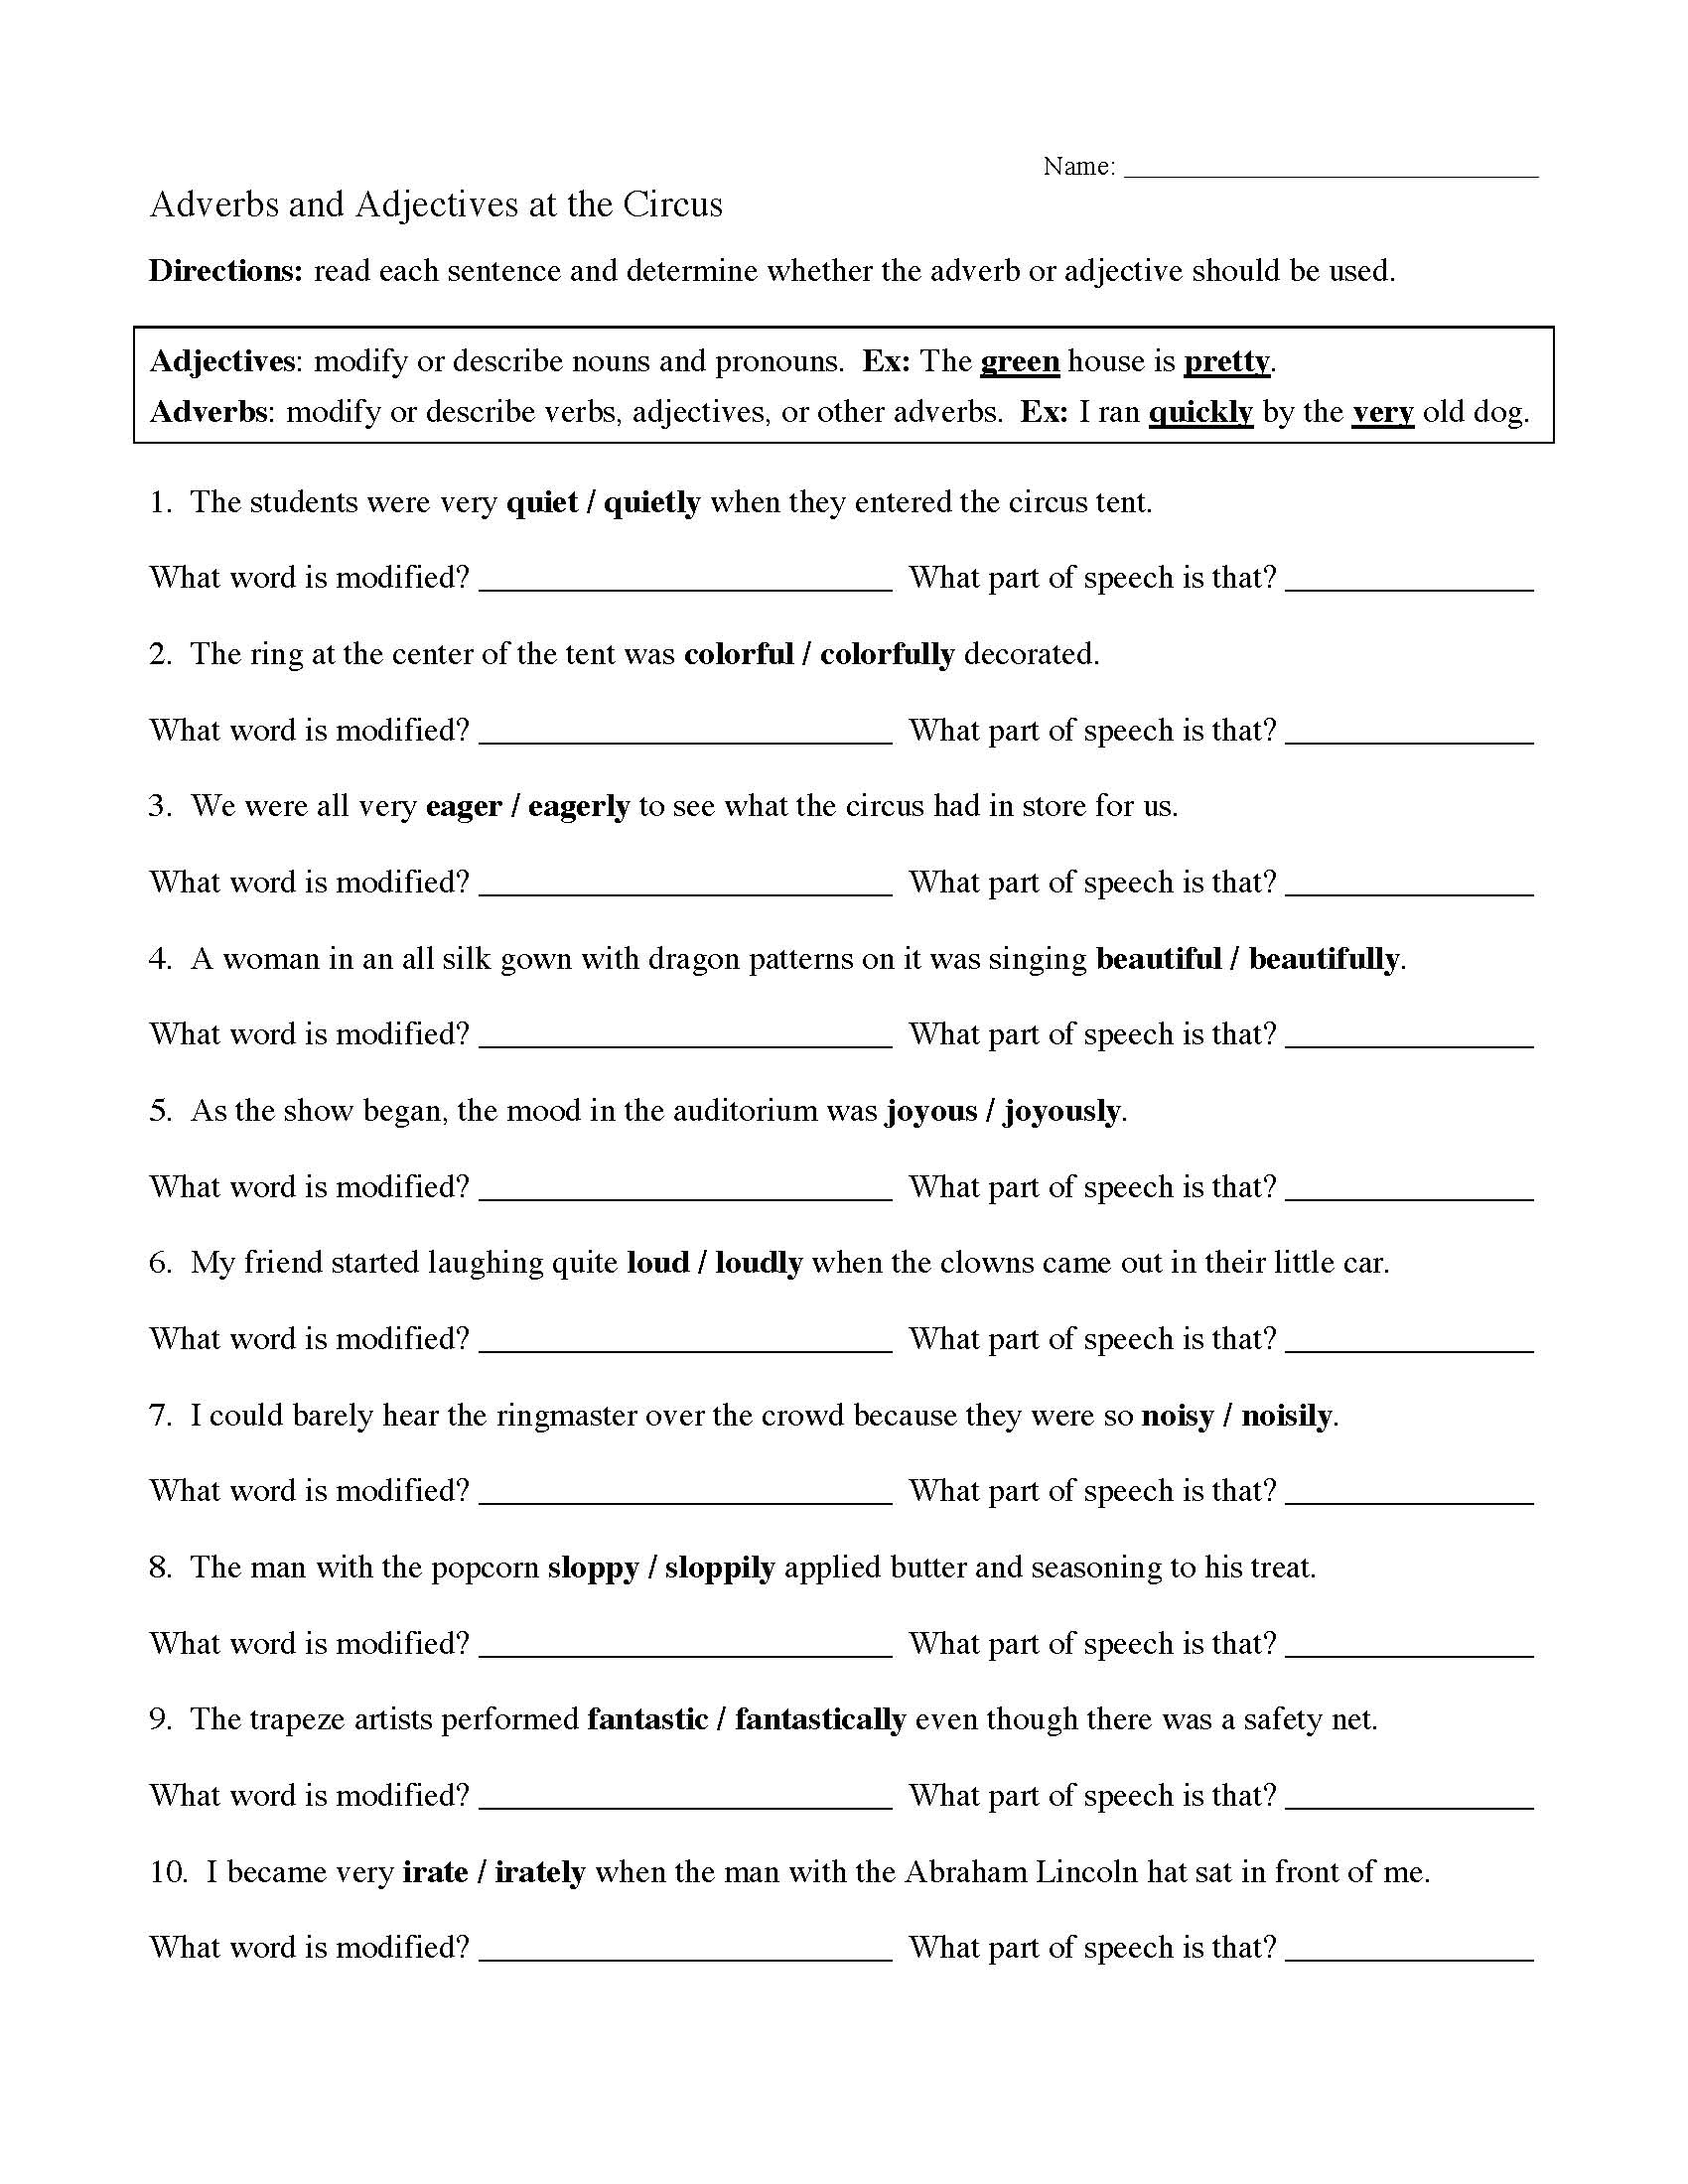 Where To Place Adjectives Adverbs Practice Worksheet